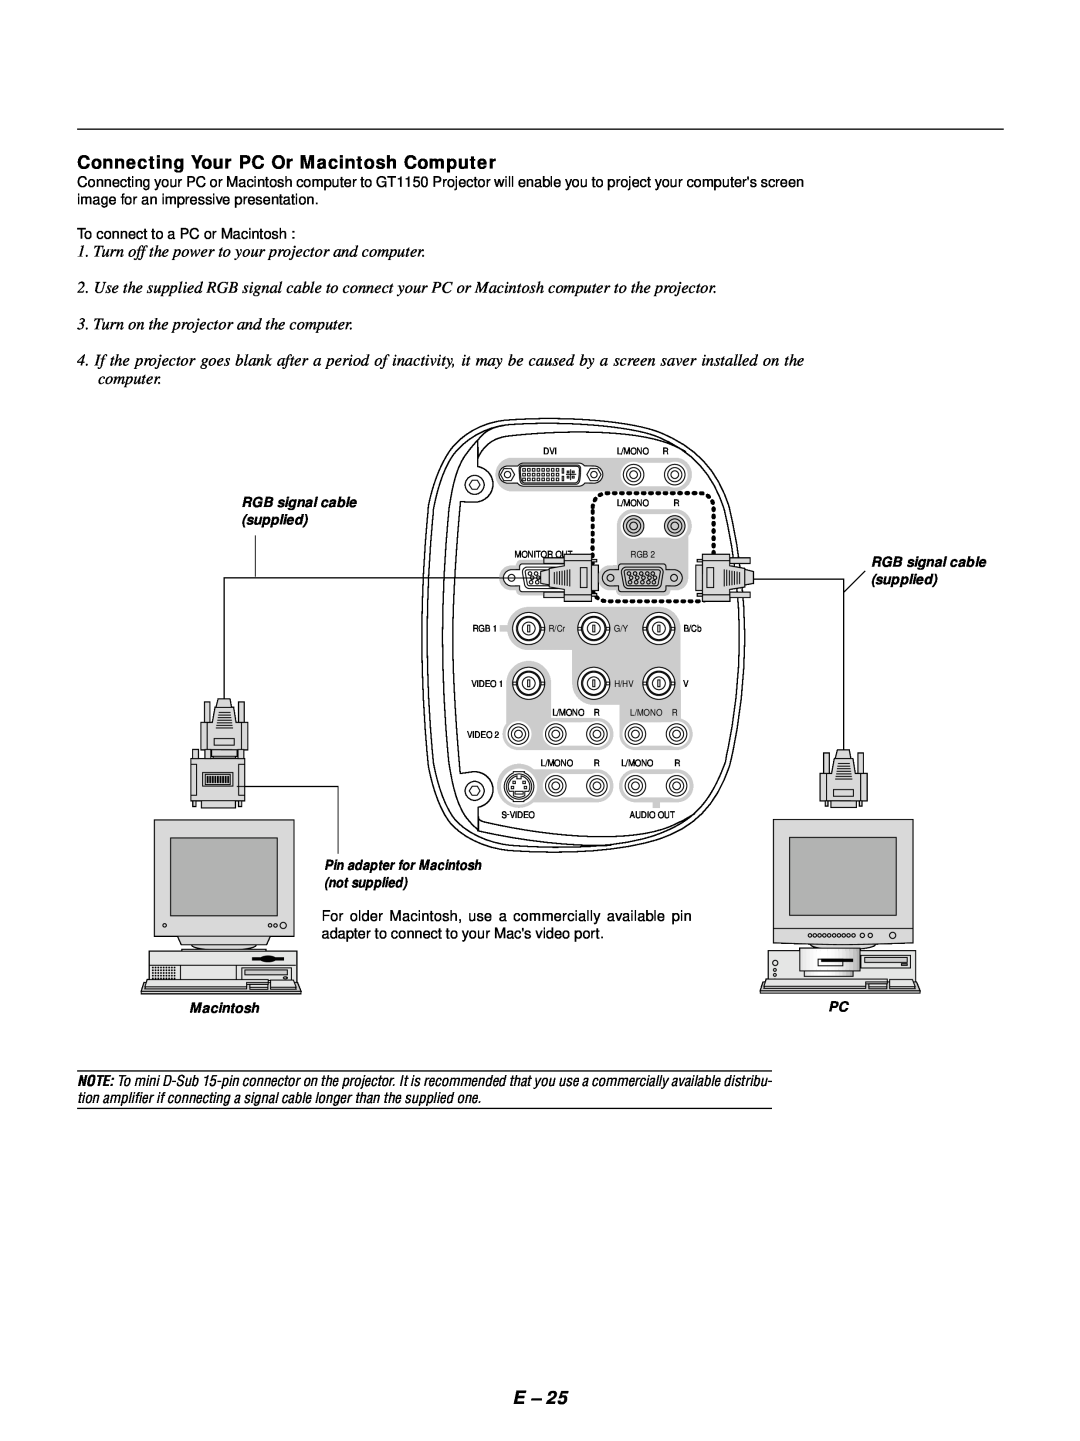 NEC GT1150 user manual Connecting Your PC Or Macintosh Computer, Turn off the power to your projector and computer 